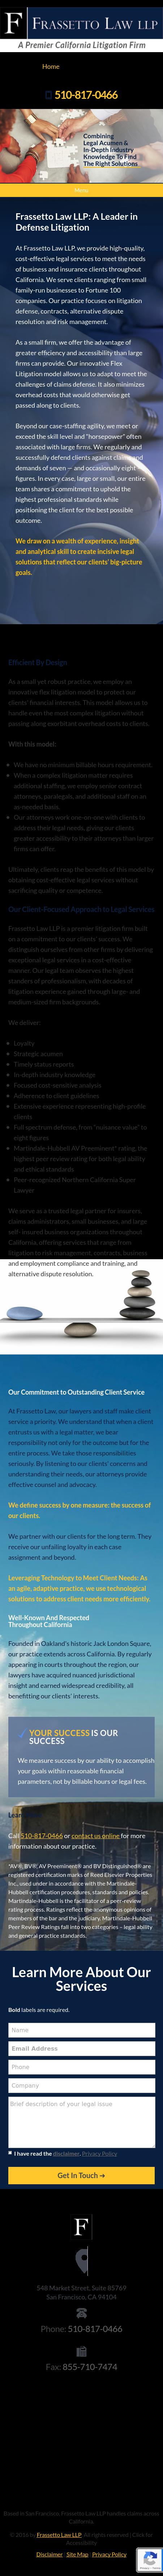 Frassetto Law LLP - Oakland CA Lawyers